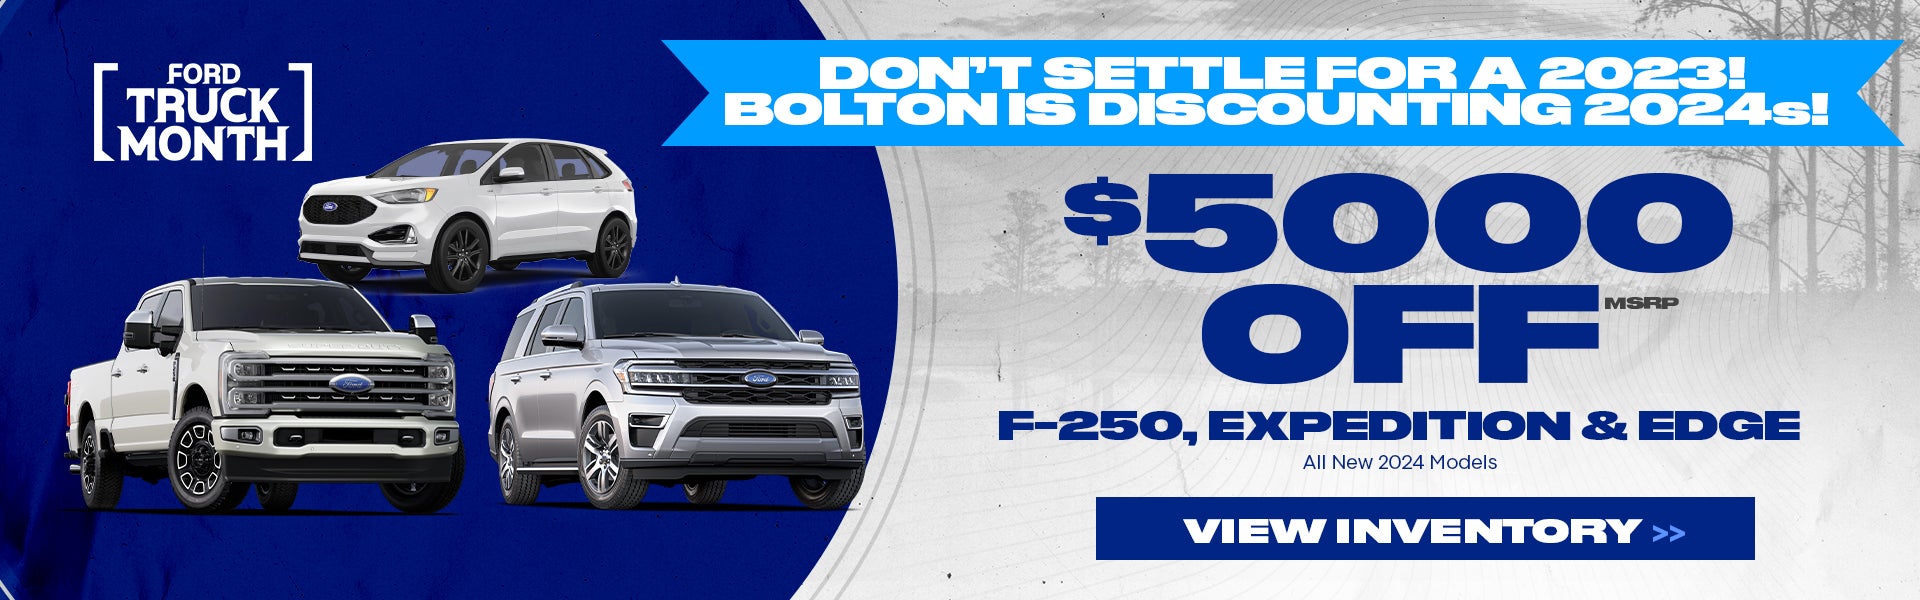 $5,000 Off MSRP on 2024 F-250, Expedition, and Edge